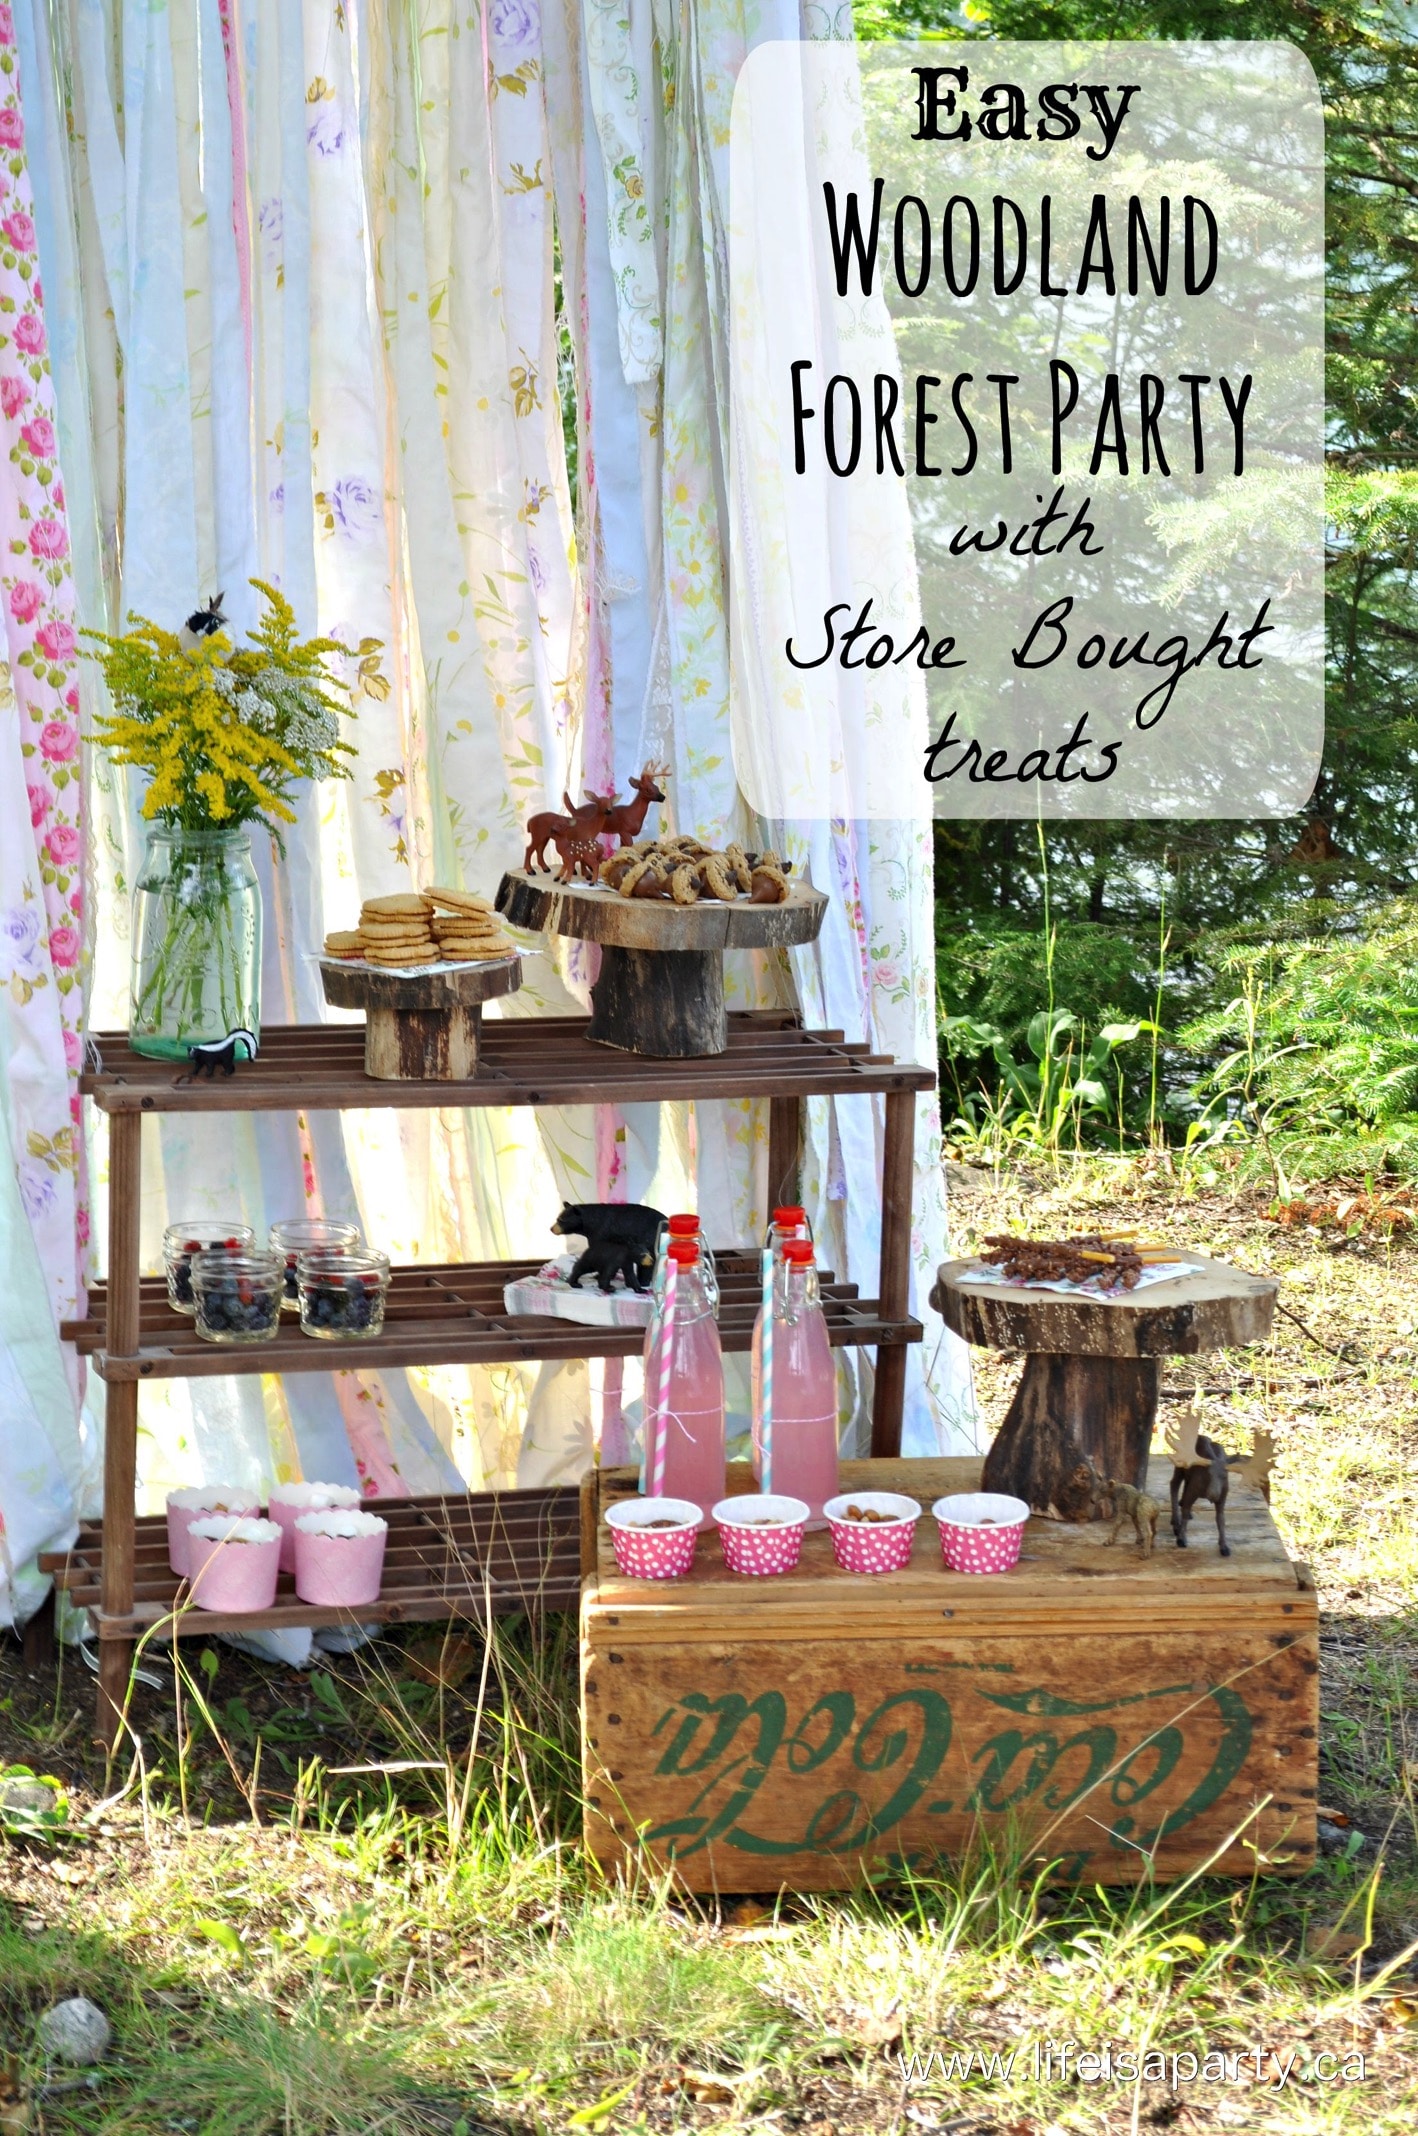 Woodland Forest Party Food Ideas: Easy to put together woodland forested themed party food ideas with store bought ingredients that are cute and delicious.